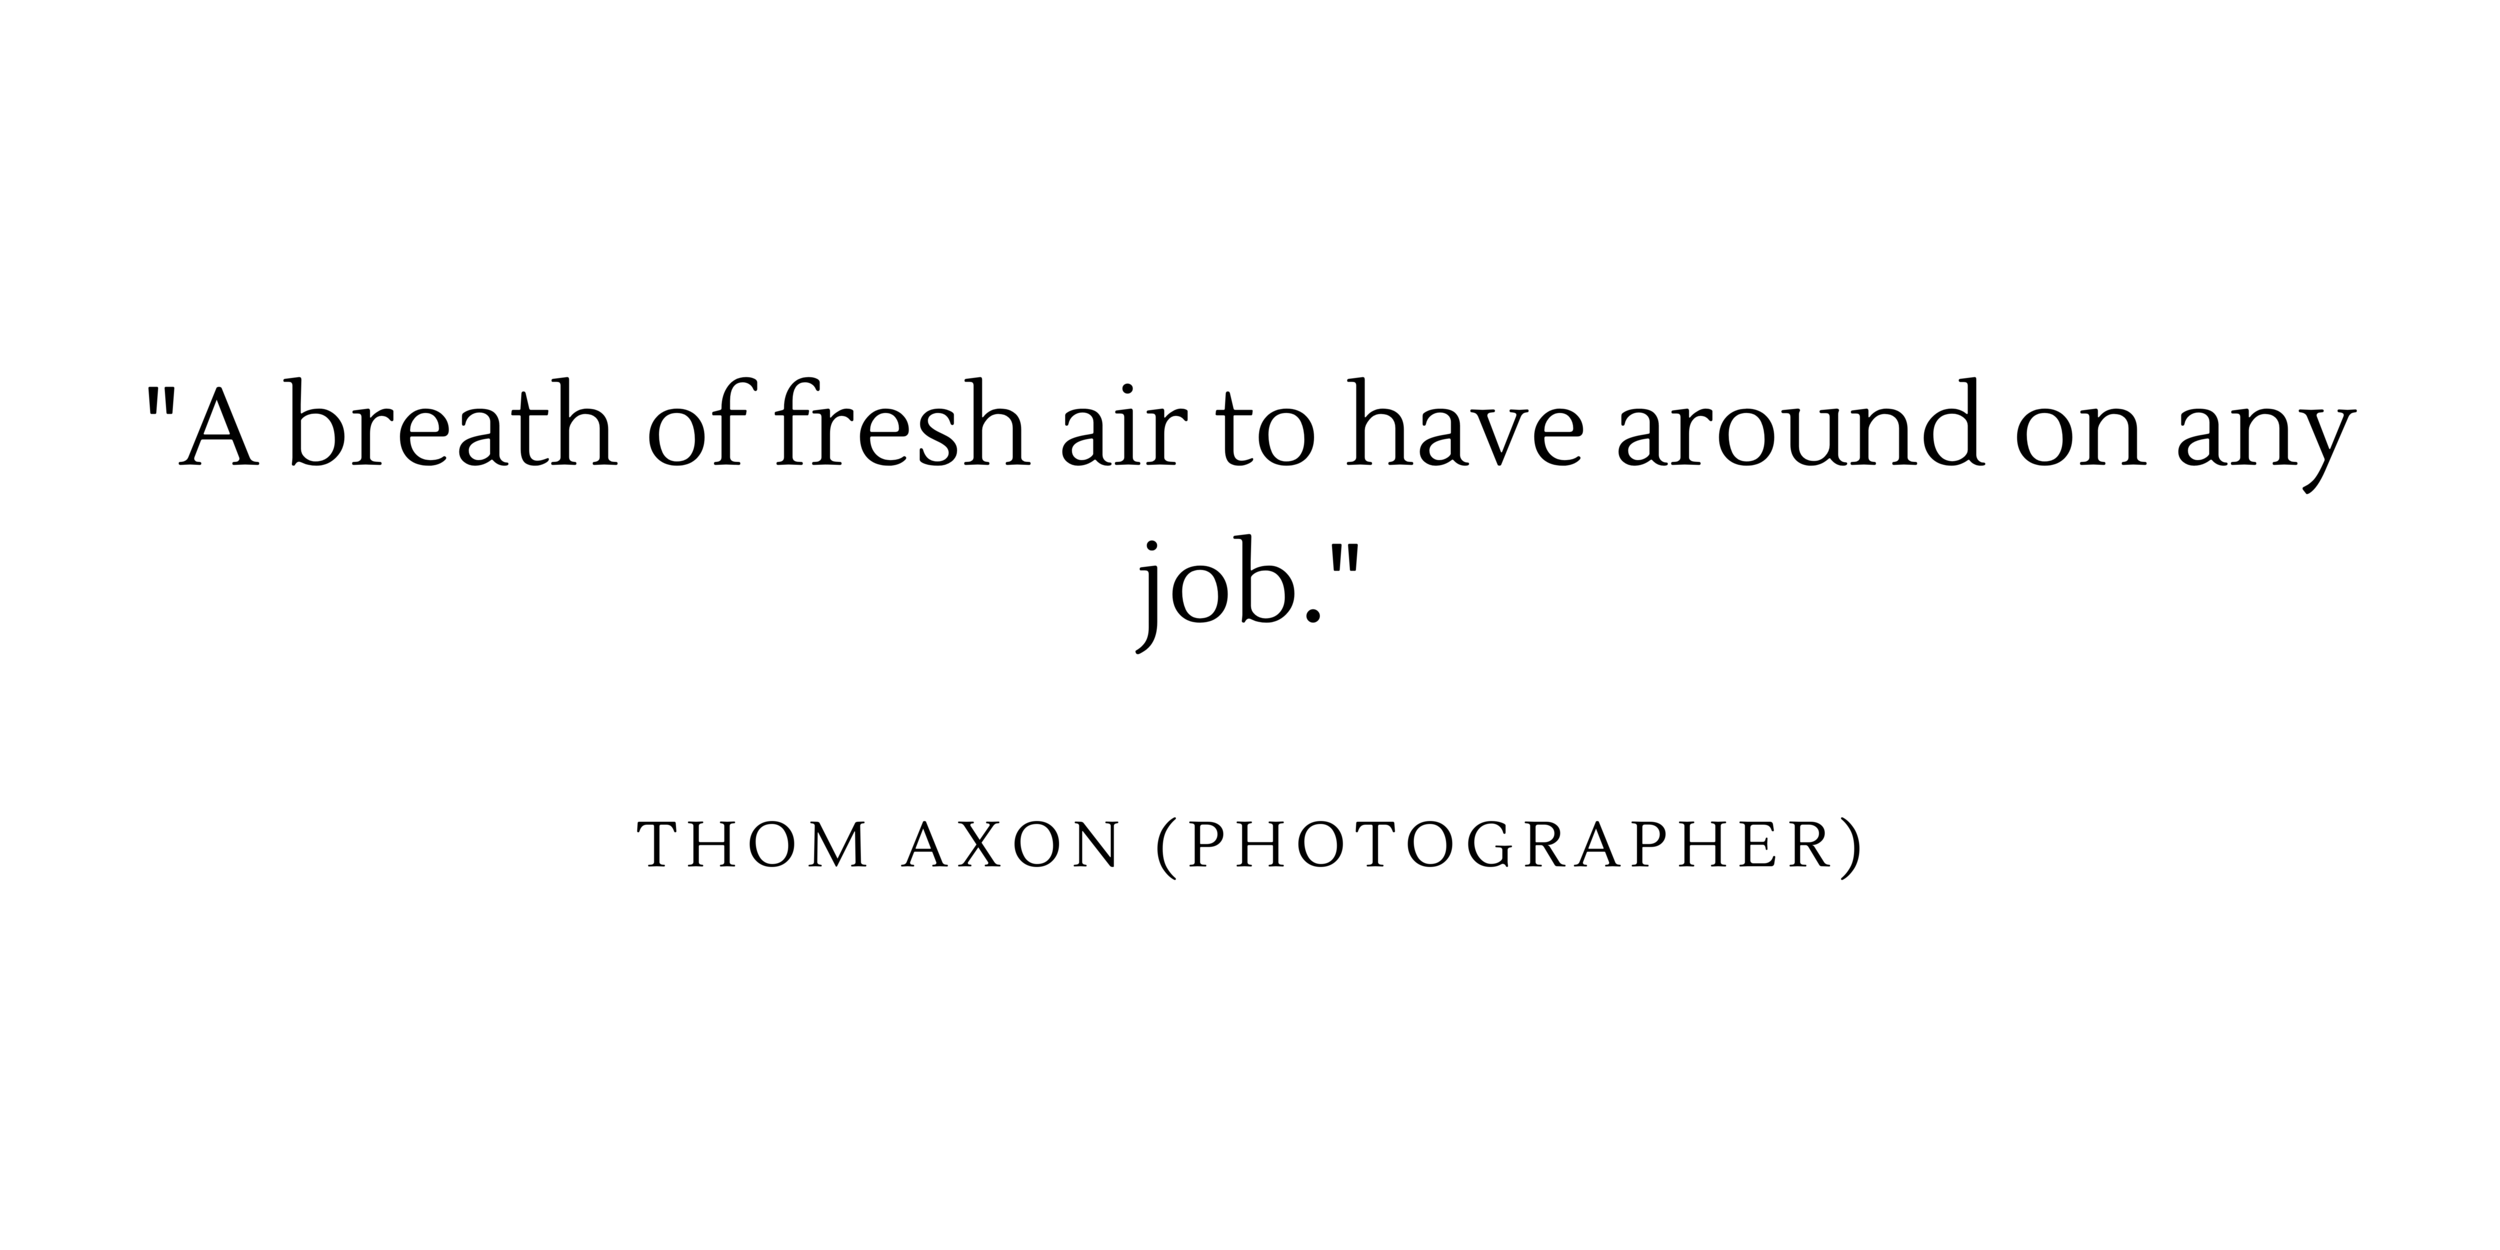  “A breath of fresh air to have around on any job” - Thom Axon (photographer) 